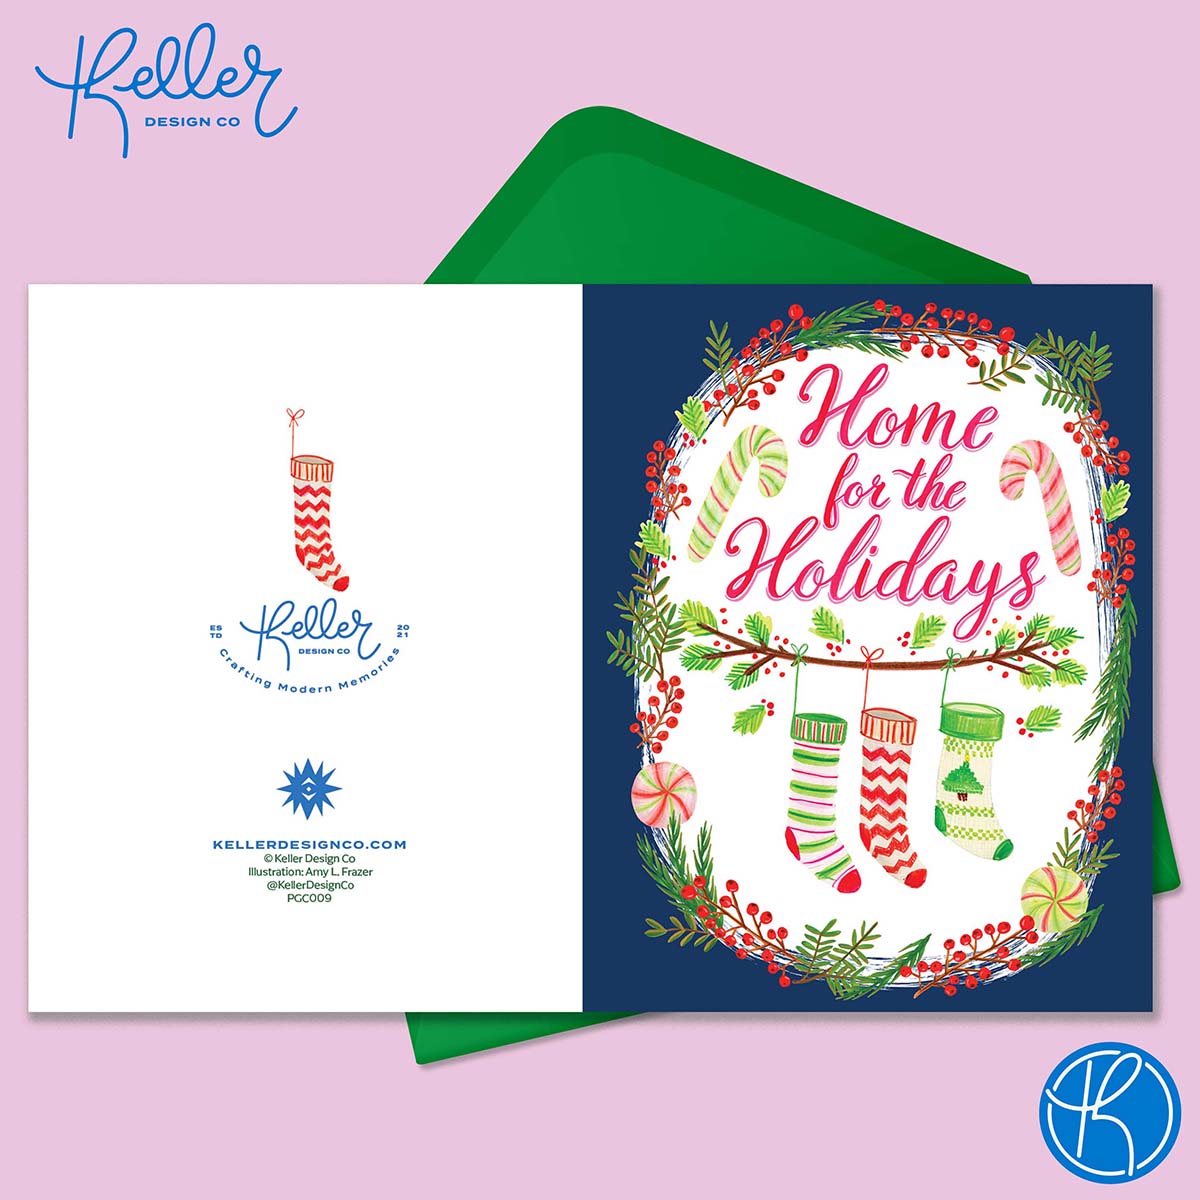 Boxed Set of 8 Cards-Home for the Holidays Greeting Cards